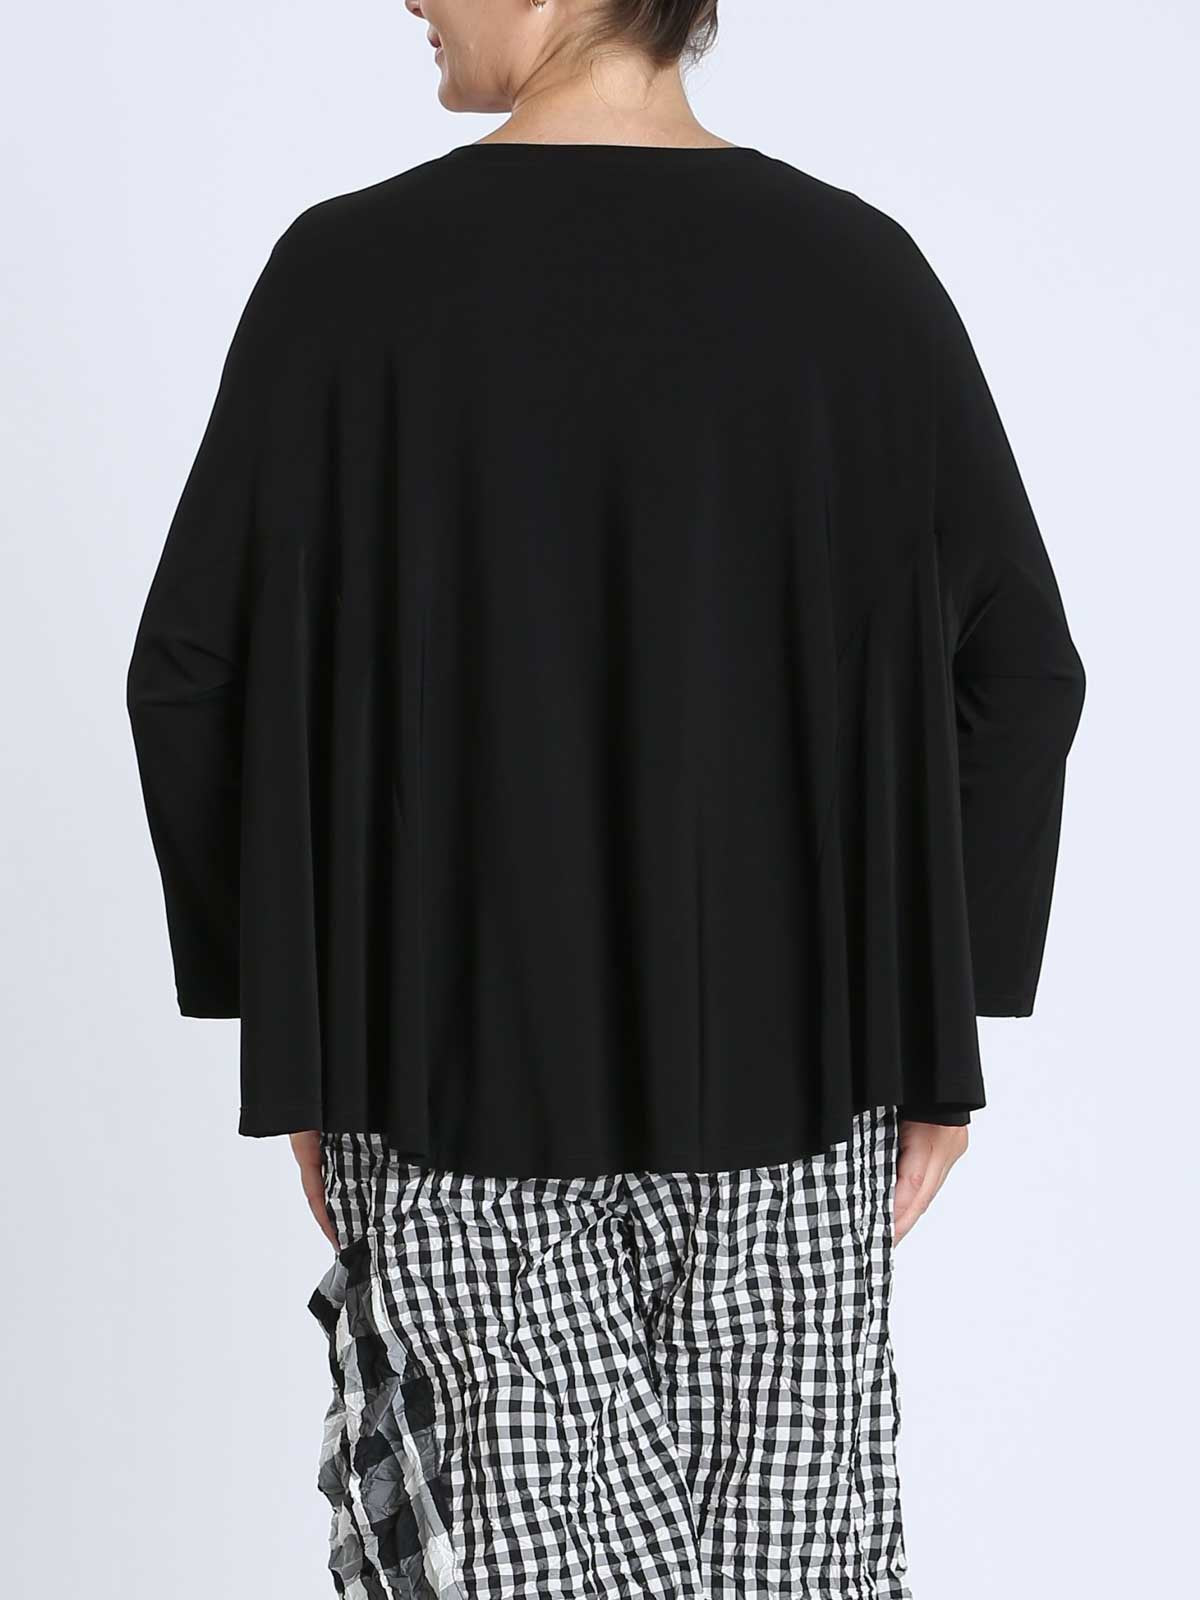 IC Collection Oversized Swing Top, Black - Statement Boutique